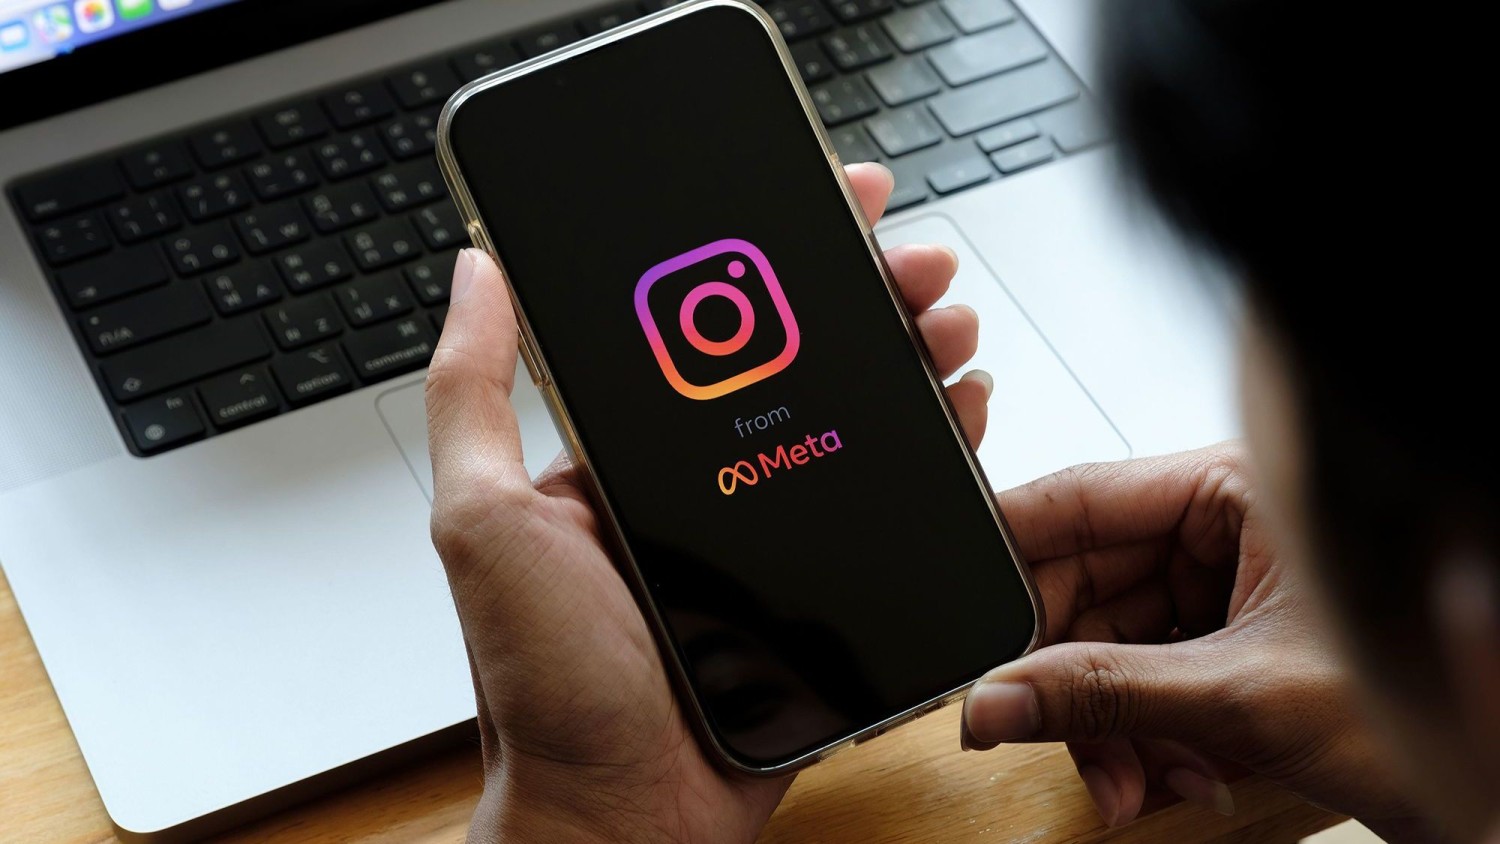 acebook and Instagram users in Europe can now opt out of ads — for a price